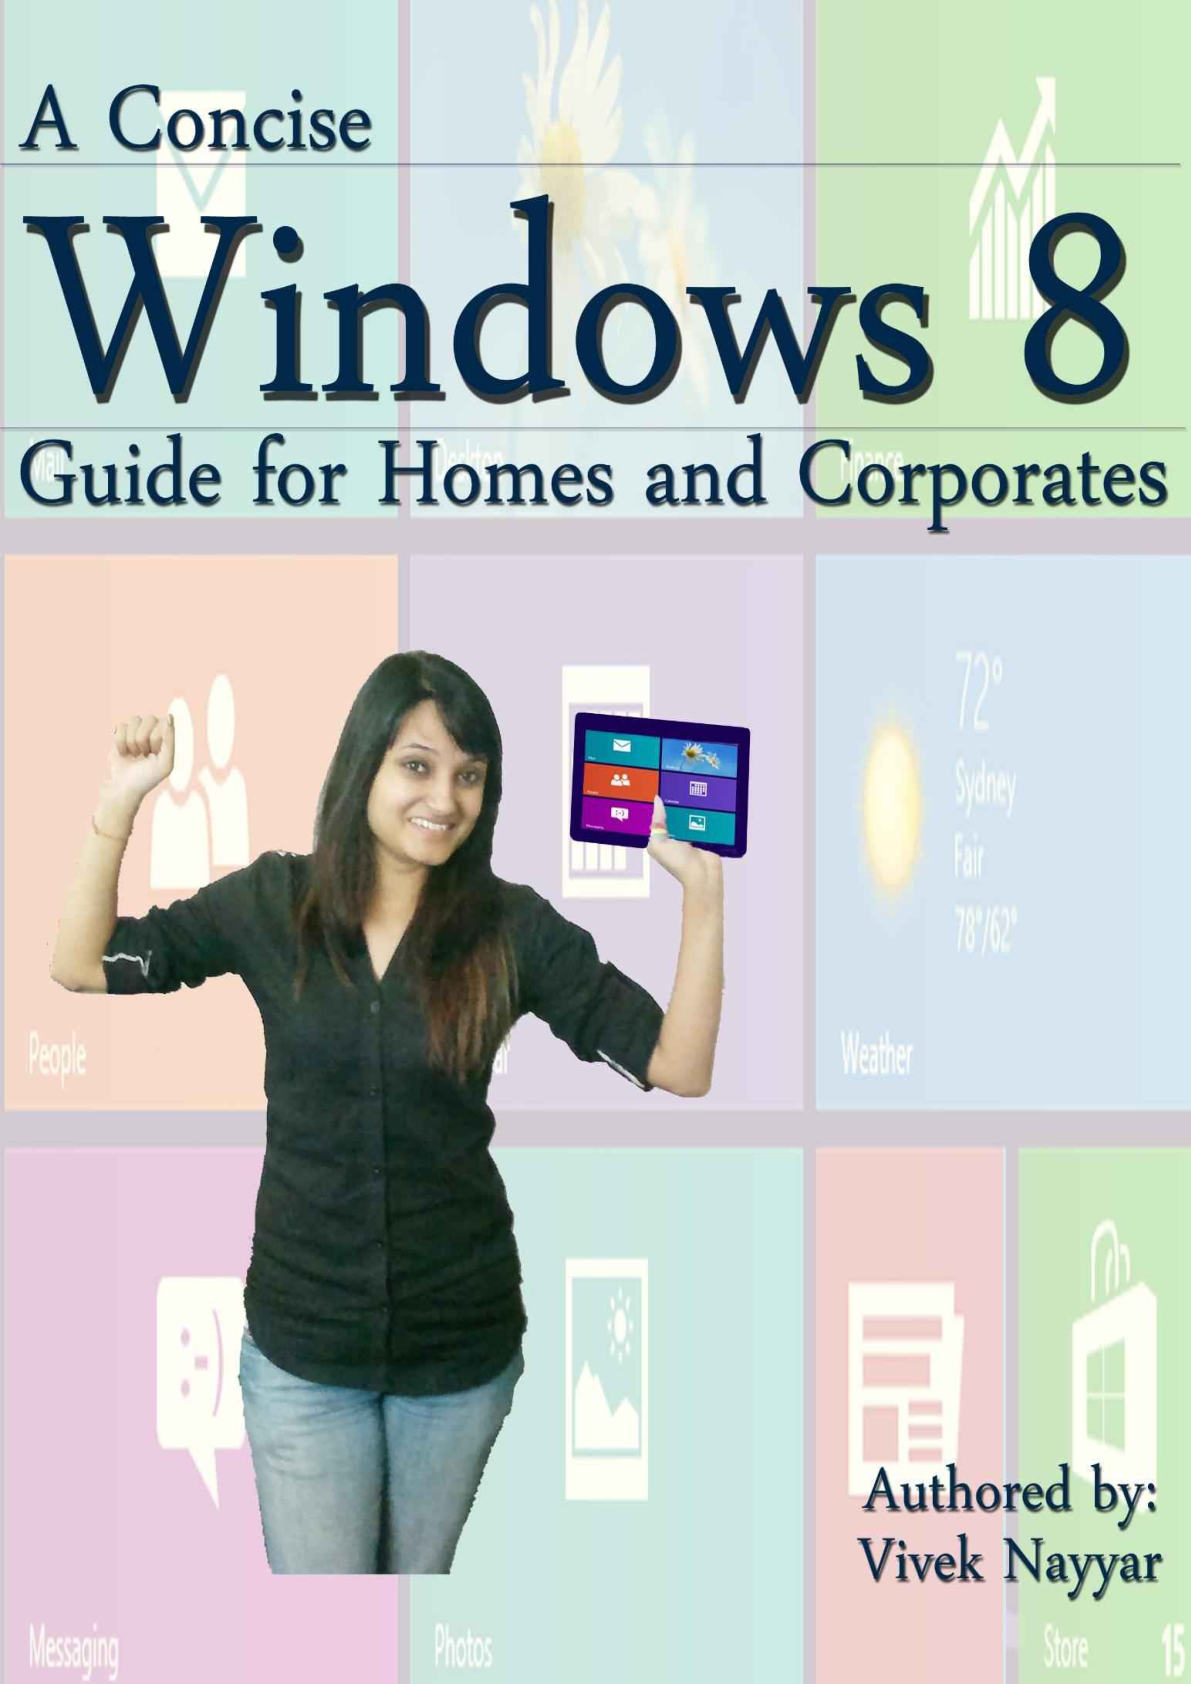 A Concise Windows 8 Guide- For Homes and Corporates.png